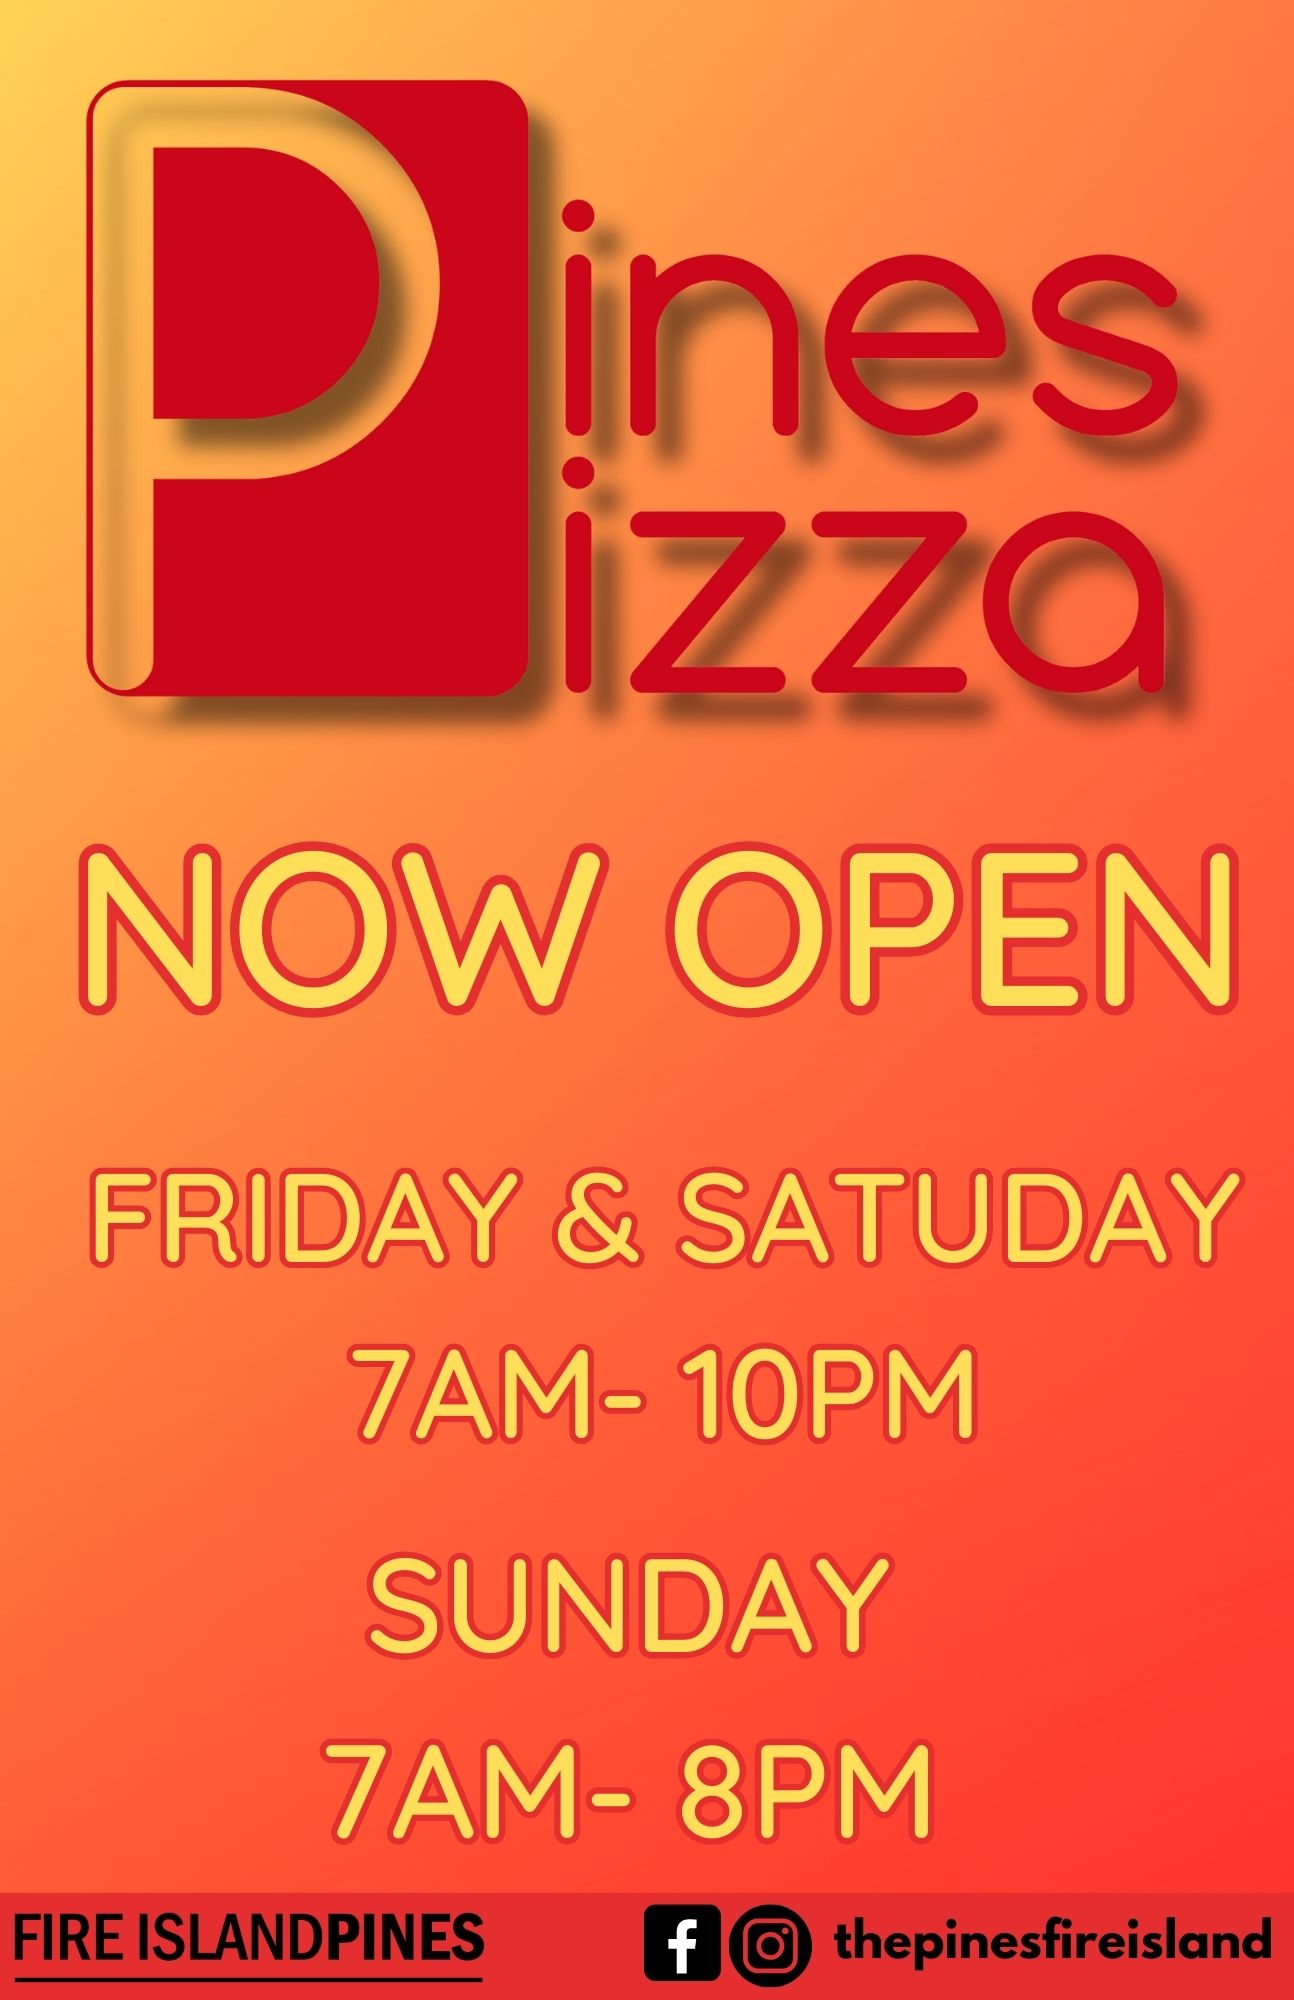 PIZZA - Now Open